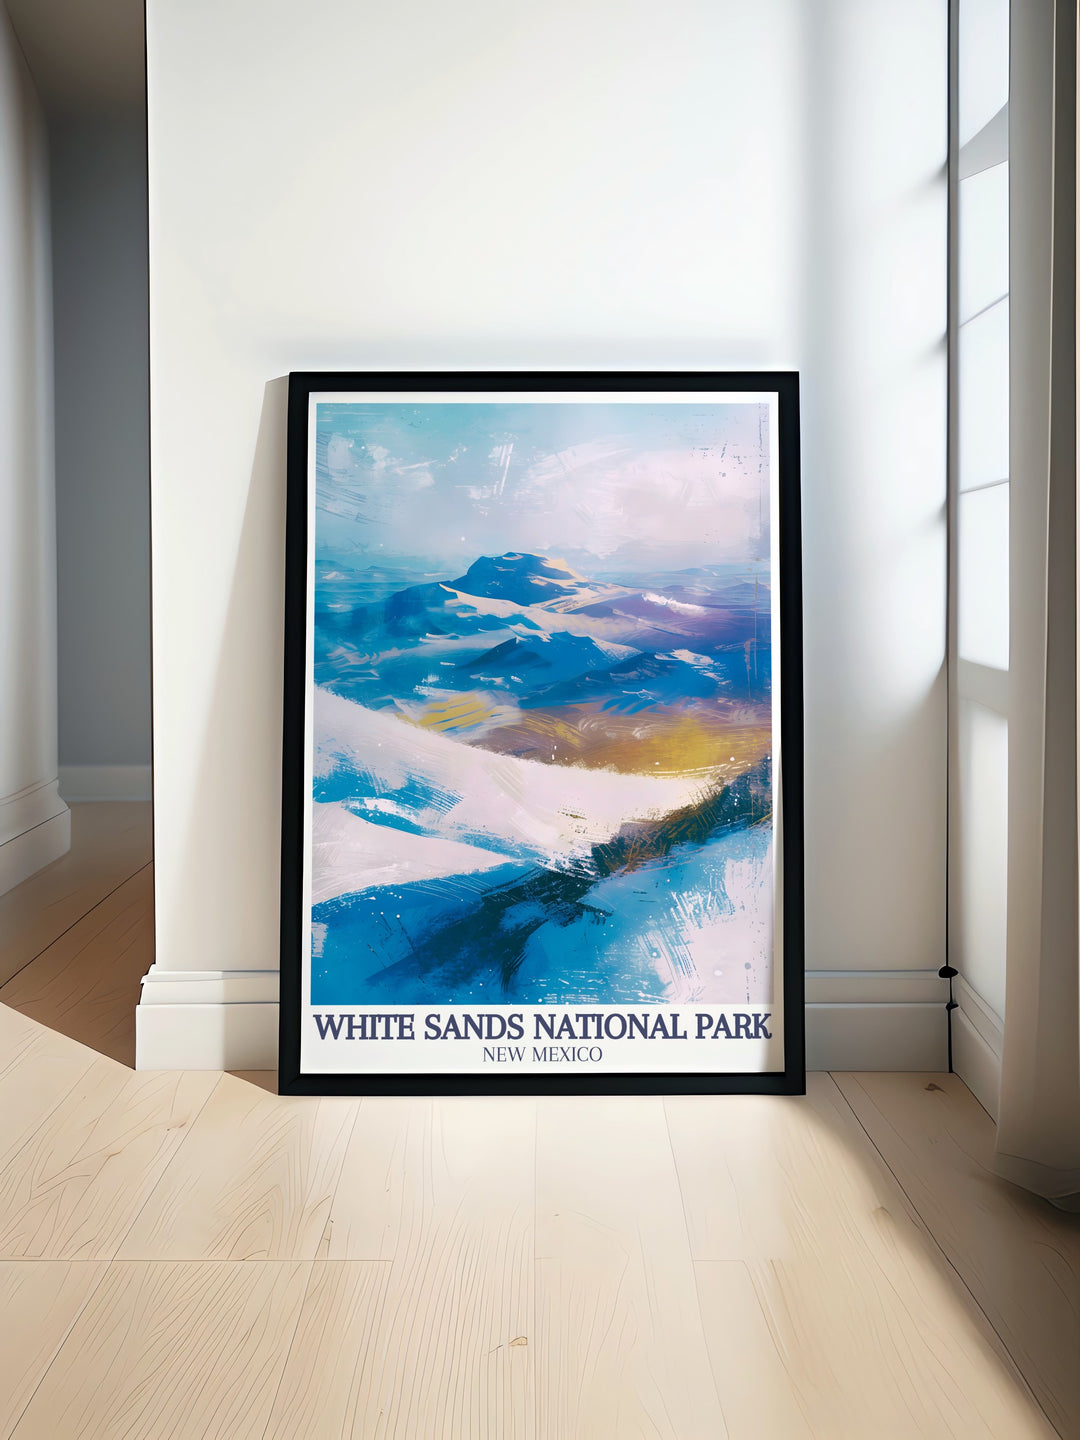 White Sands National Park art print featuring the stunning Sacramento Mountains and the beautiful Chihuahuan Desert perfect for adding elegant home decor and capturing the serene beauty of nature ideal for living room wall decor and travel enthusiasts.